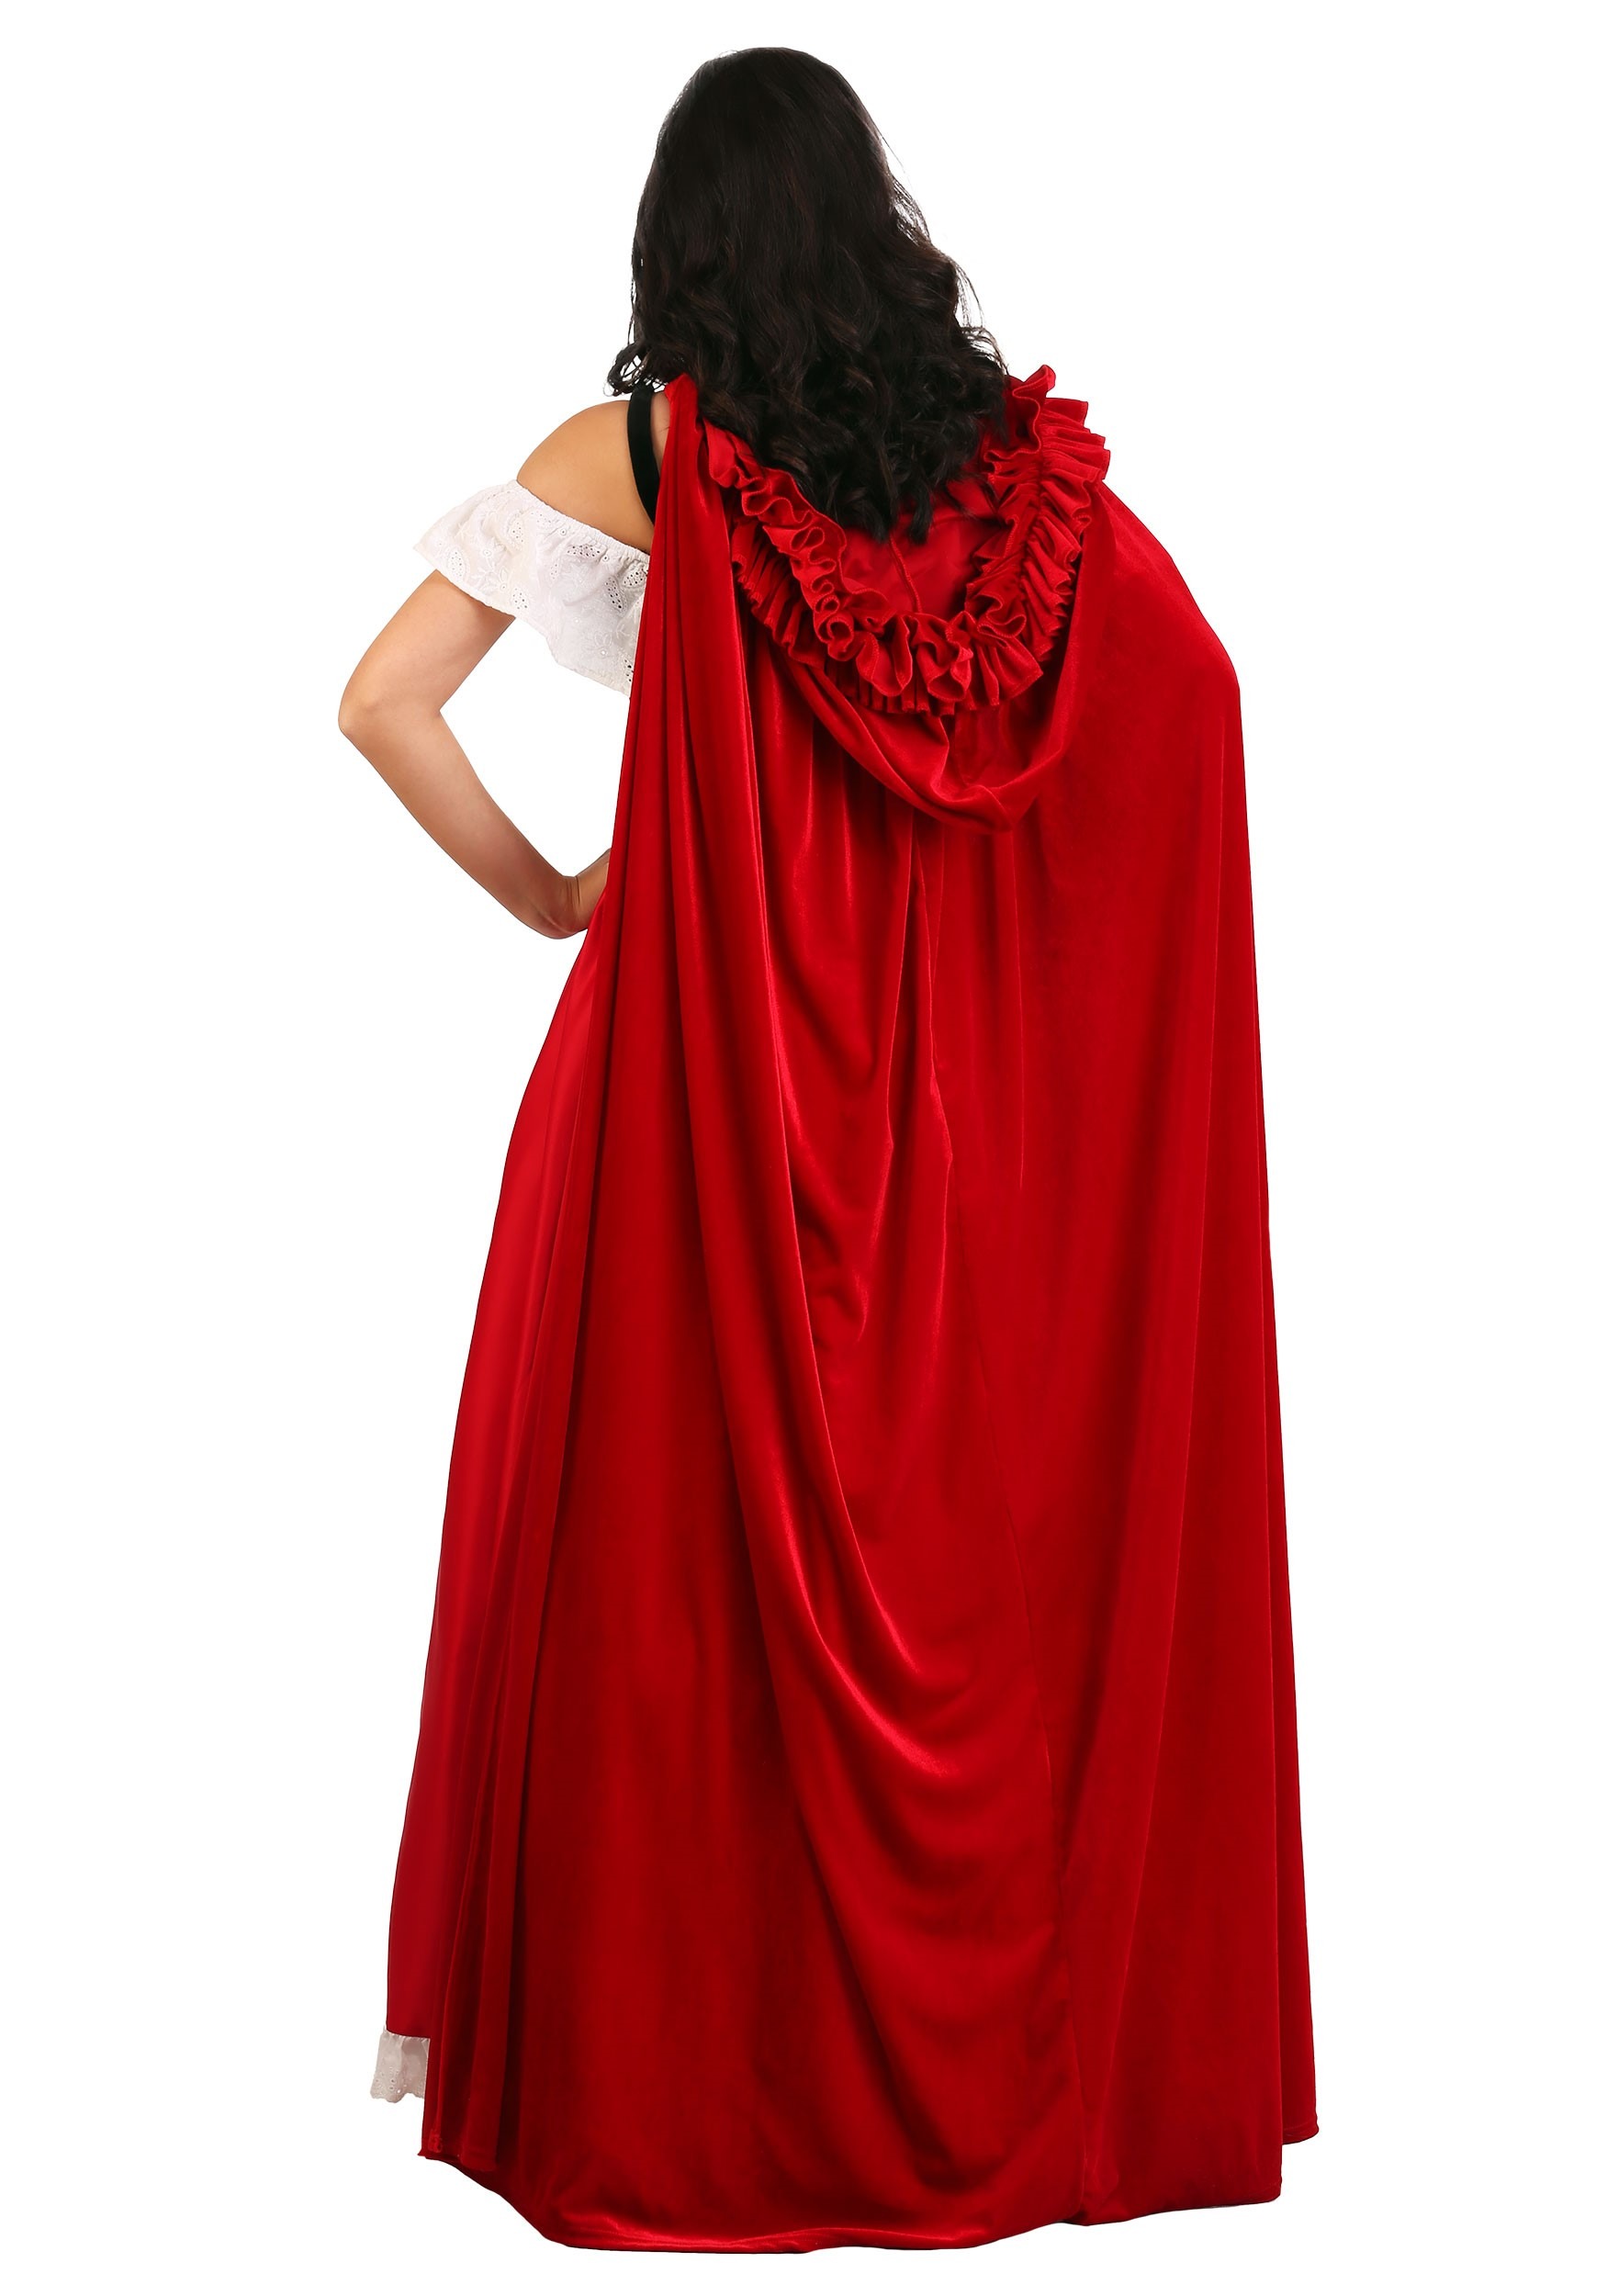 Deluxe Red Riding Hood Women's Costume